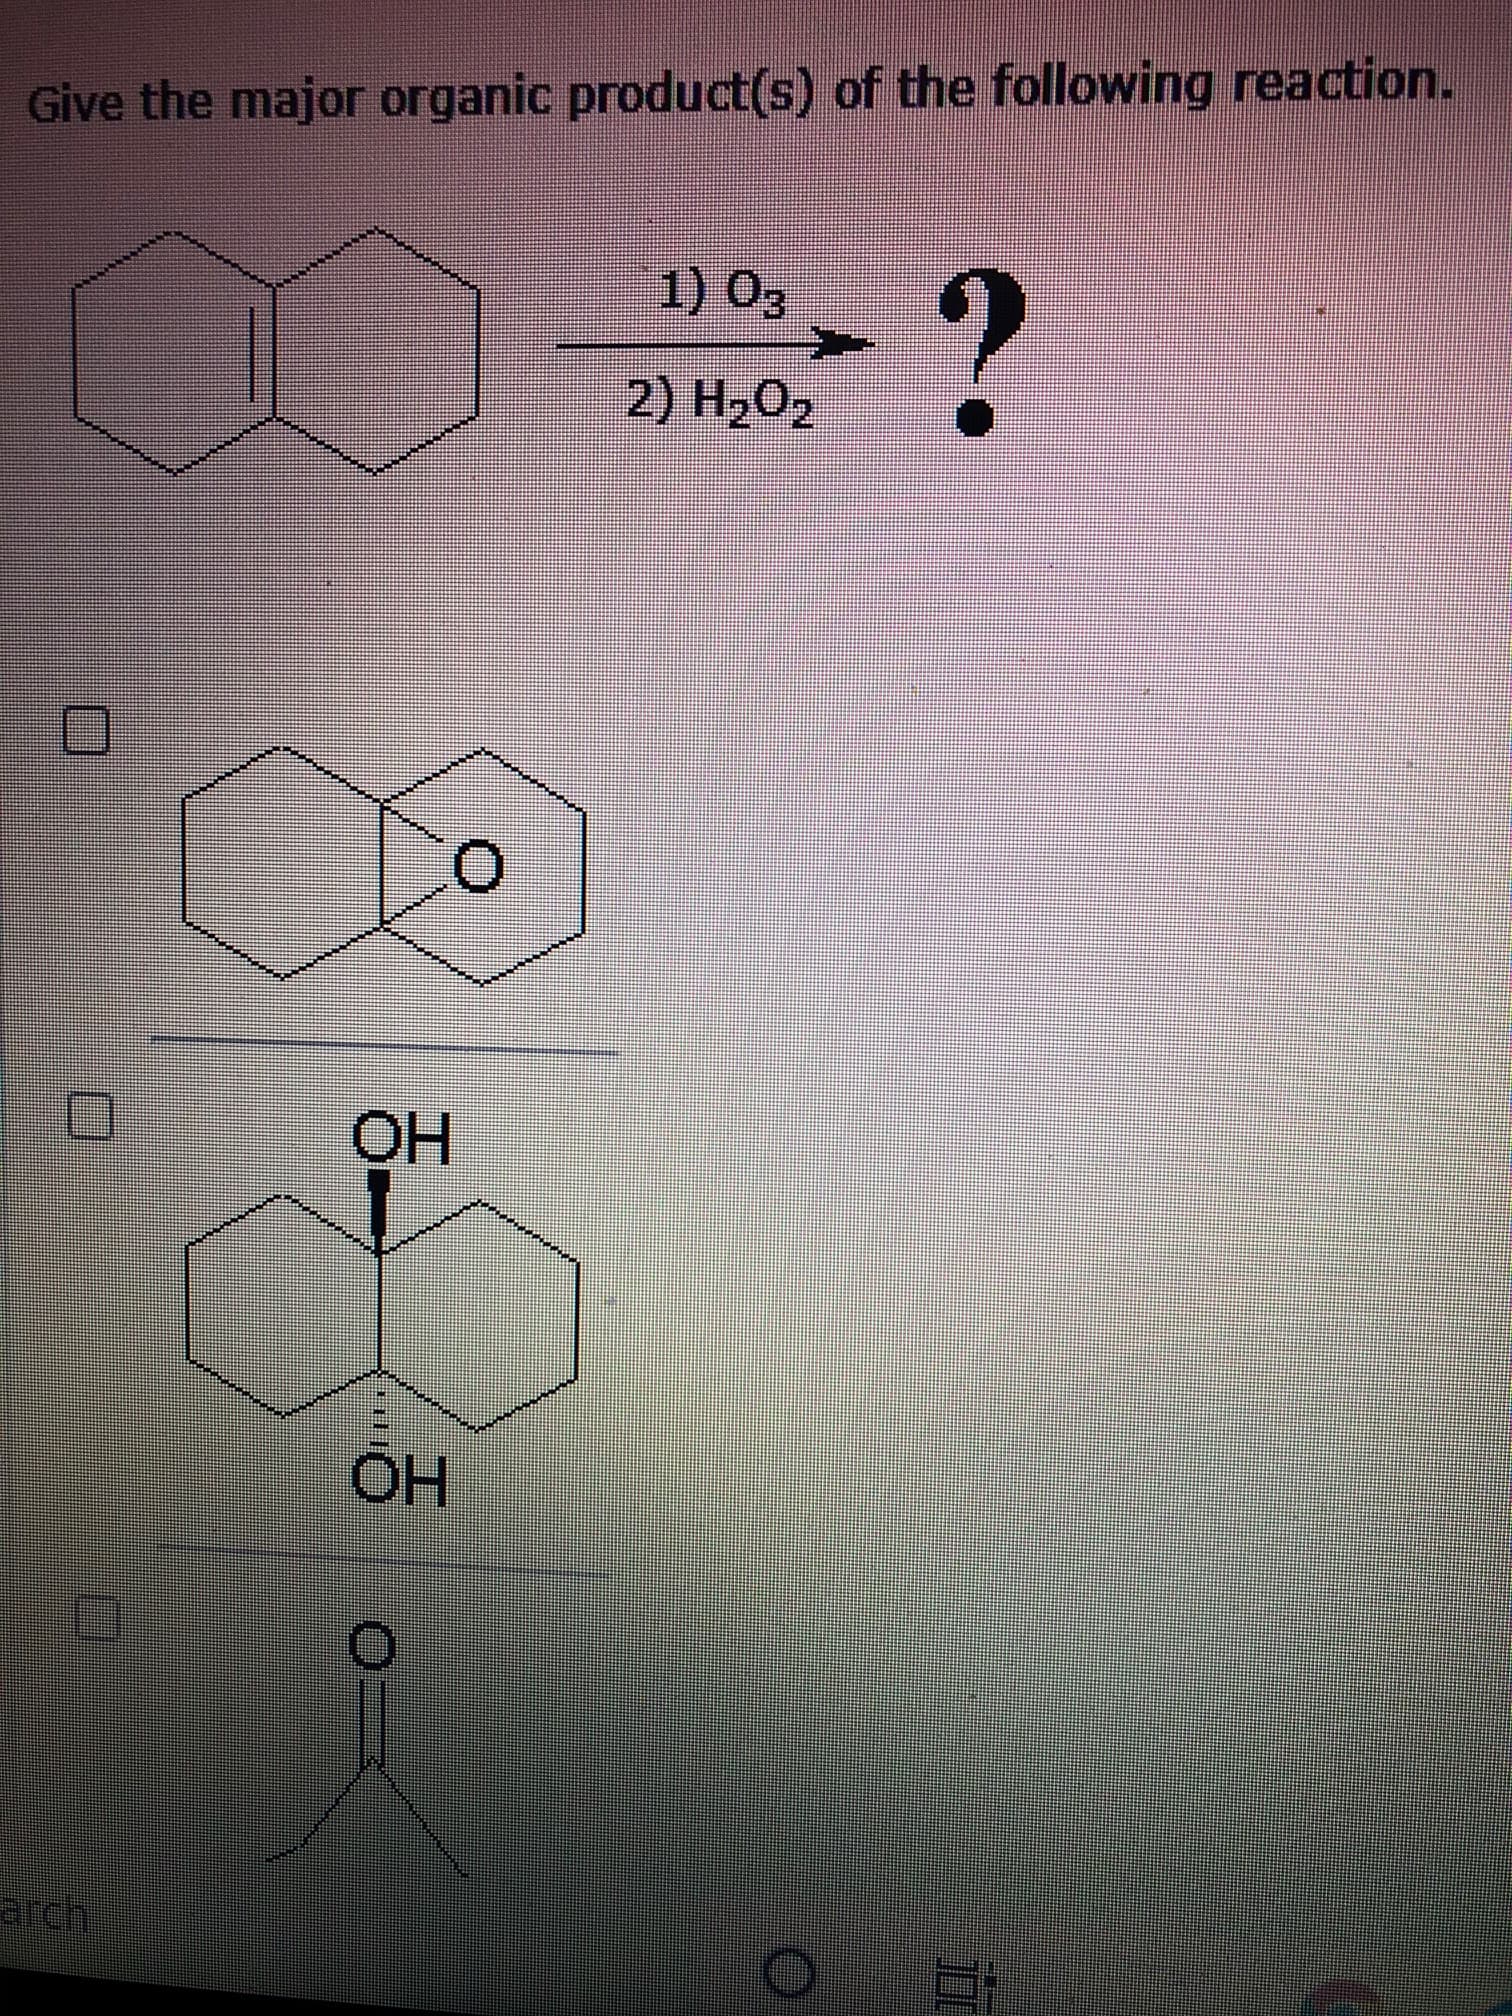 Give the major organic product(s) of the following reaction.
1) 0,
?
2) H202
